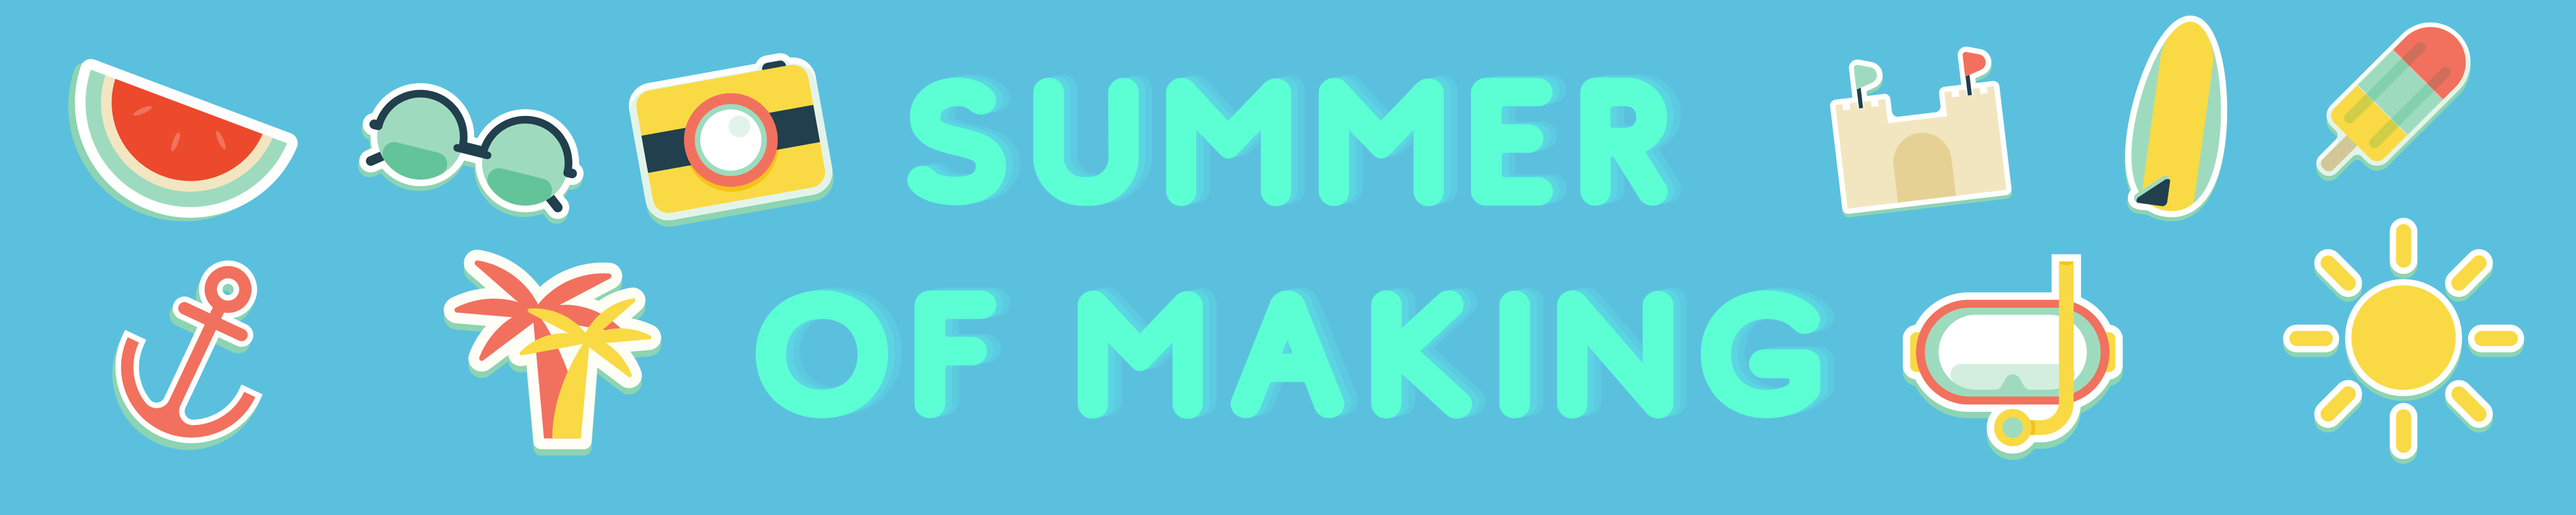 Colorful banner with icons representing summer saying Summer of Making